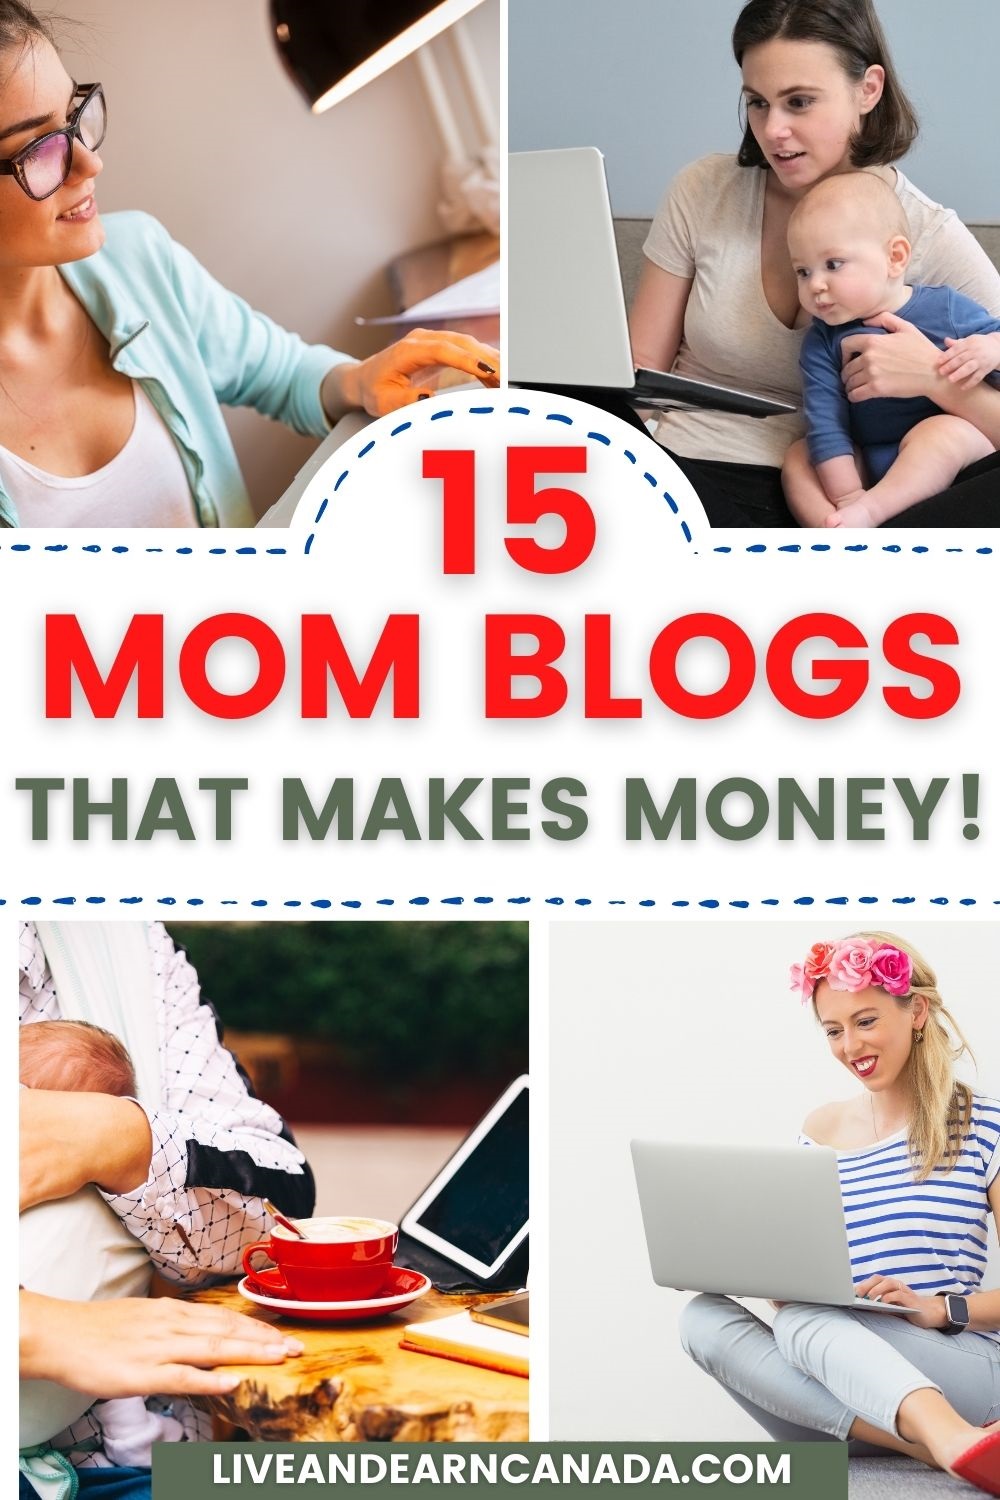 Successful mom blogs that make money. Find out which Mom Bloggers to Follow that earn extra money per month! Looking for mom blogs to follow and learn from the best mom bloggers? I have put together a list of top 15 mom bloggers to follow who make over $5000 a month blogging. They will inspire you with mommy blog ideas that make money and expert tips to help you make money blogging fast. If you are a mom that wants to write and start a blog? Learn the popular blogs and mom blogs that make money. Work from home with a mom blog and make money doing it.